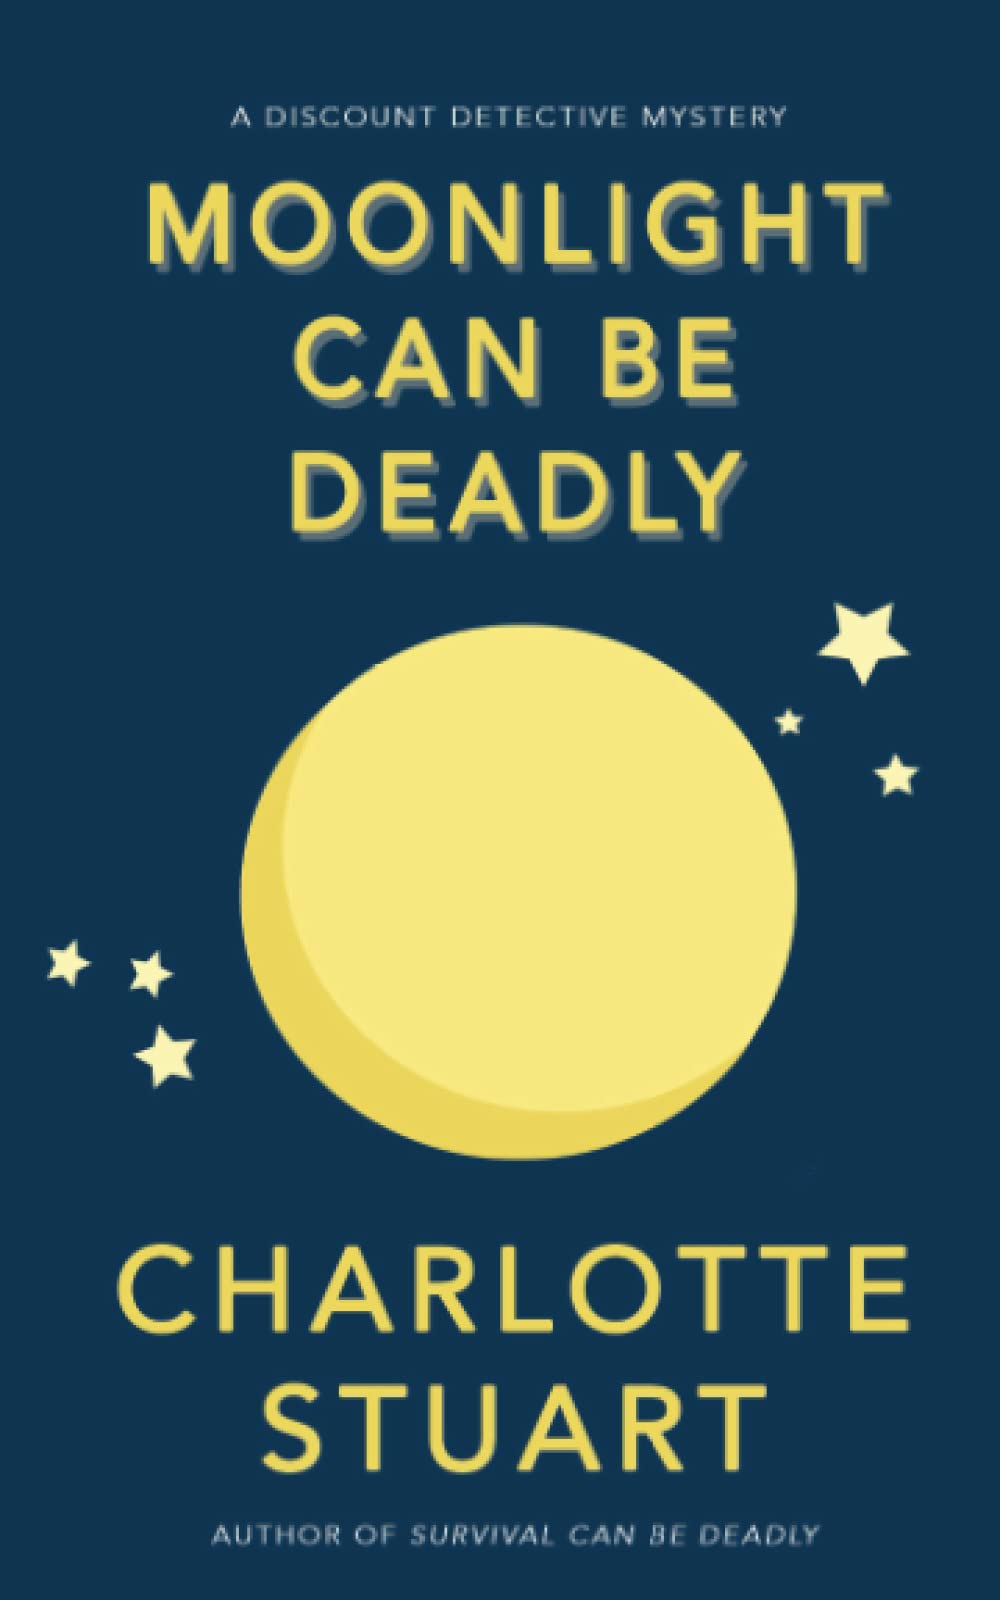 Moonlight Can Be Deadly (A Discount Detective Mystery)